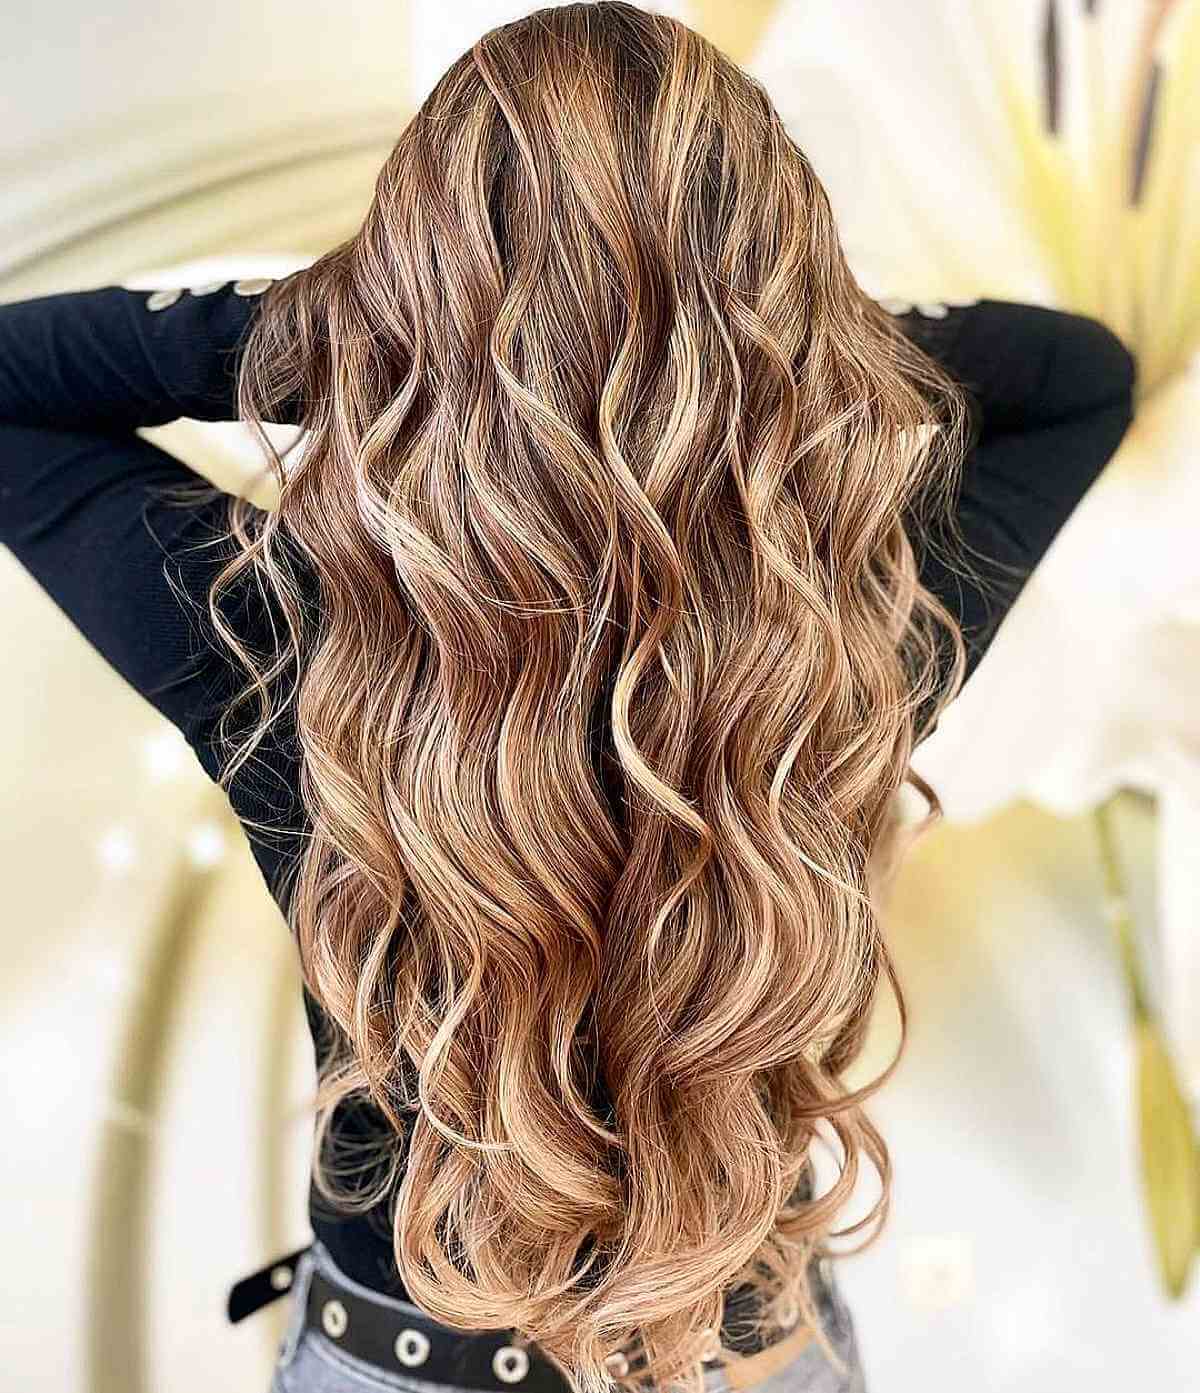 33 Stunning Examples of Brown and Blonde Hair